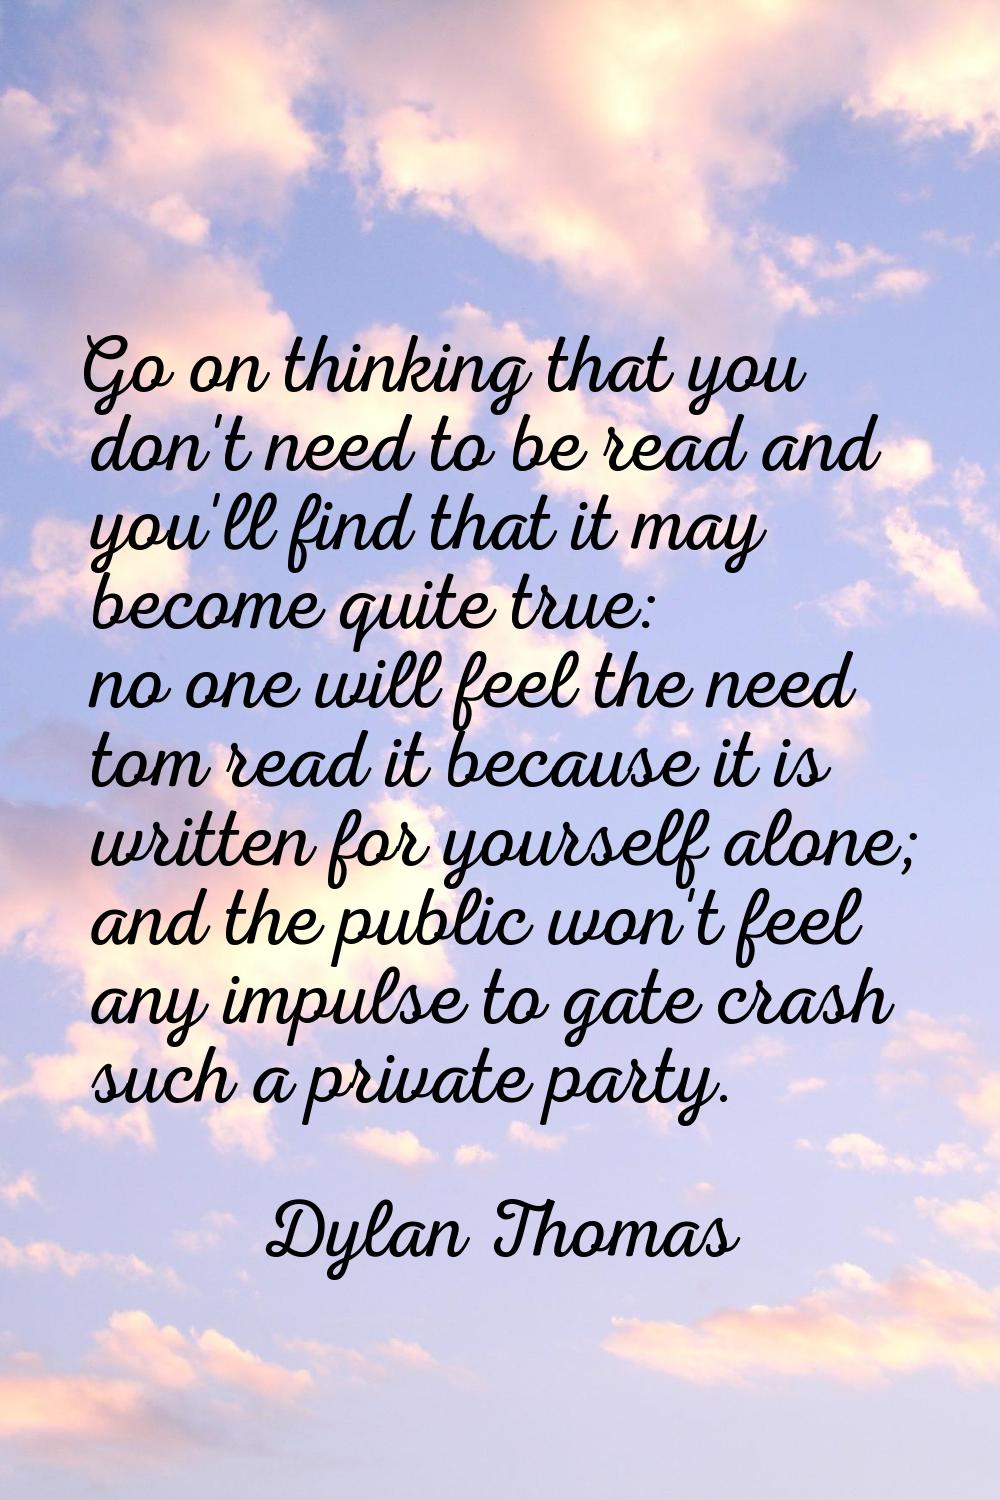 Go on thinking that you don't need to be read and you'll find that it may become quite true: no one